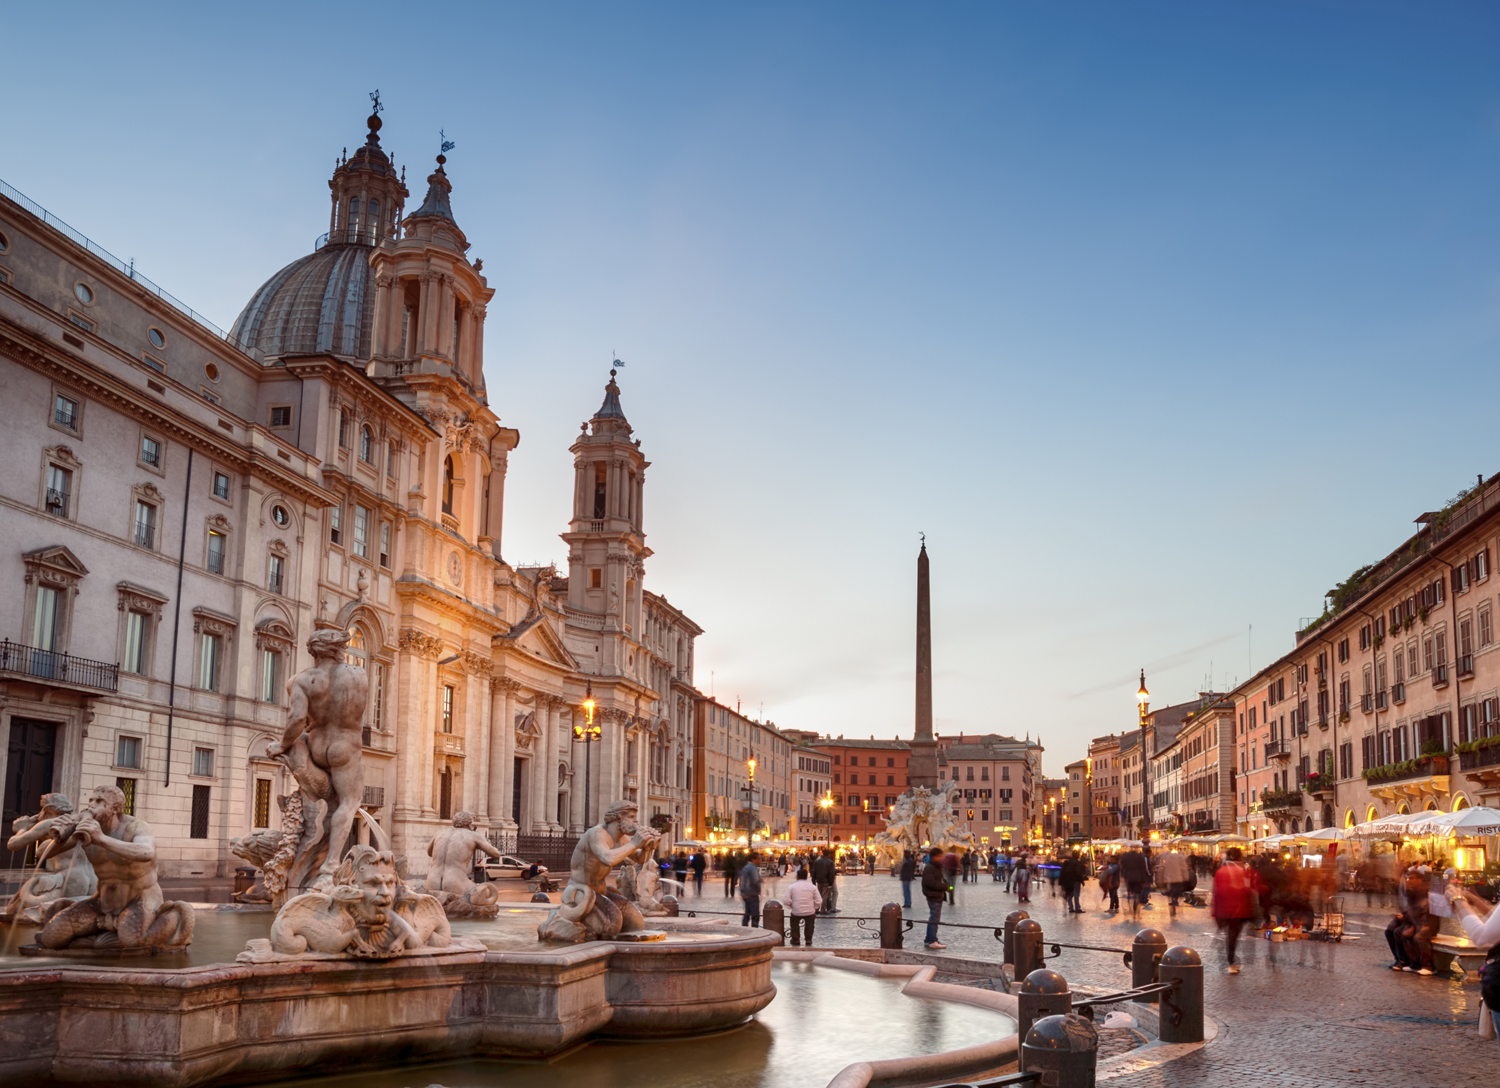 Piazza Navona, Rome Liveliest square - tipntrips